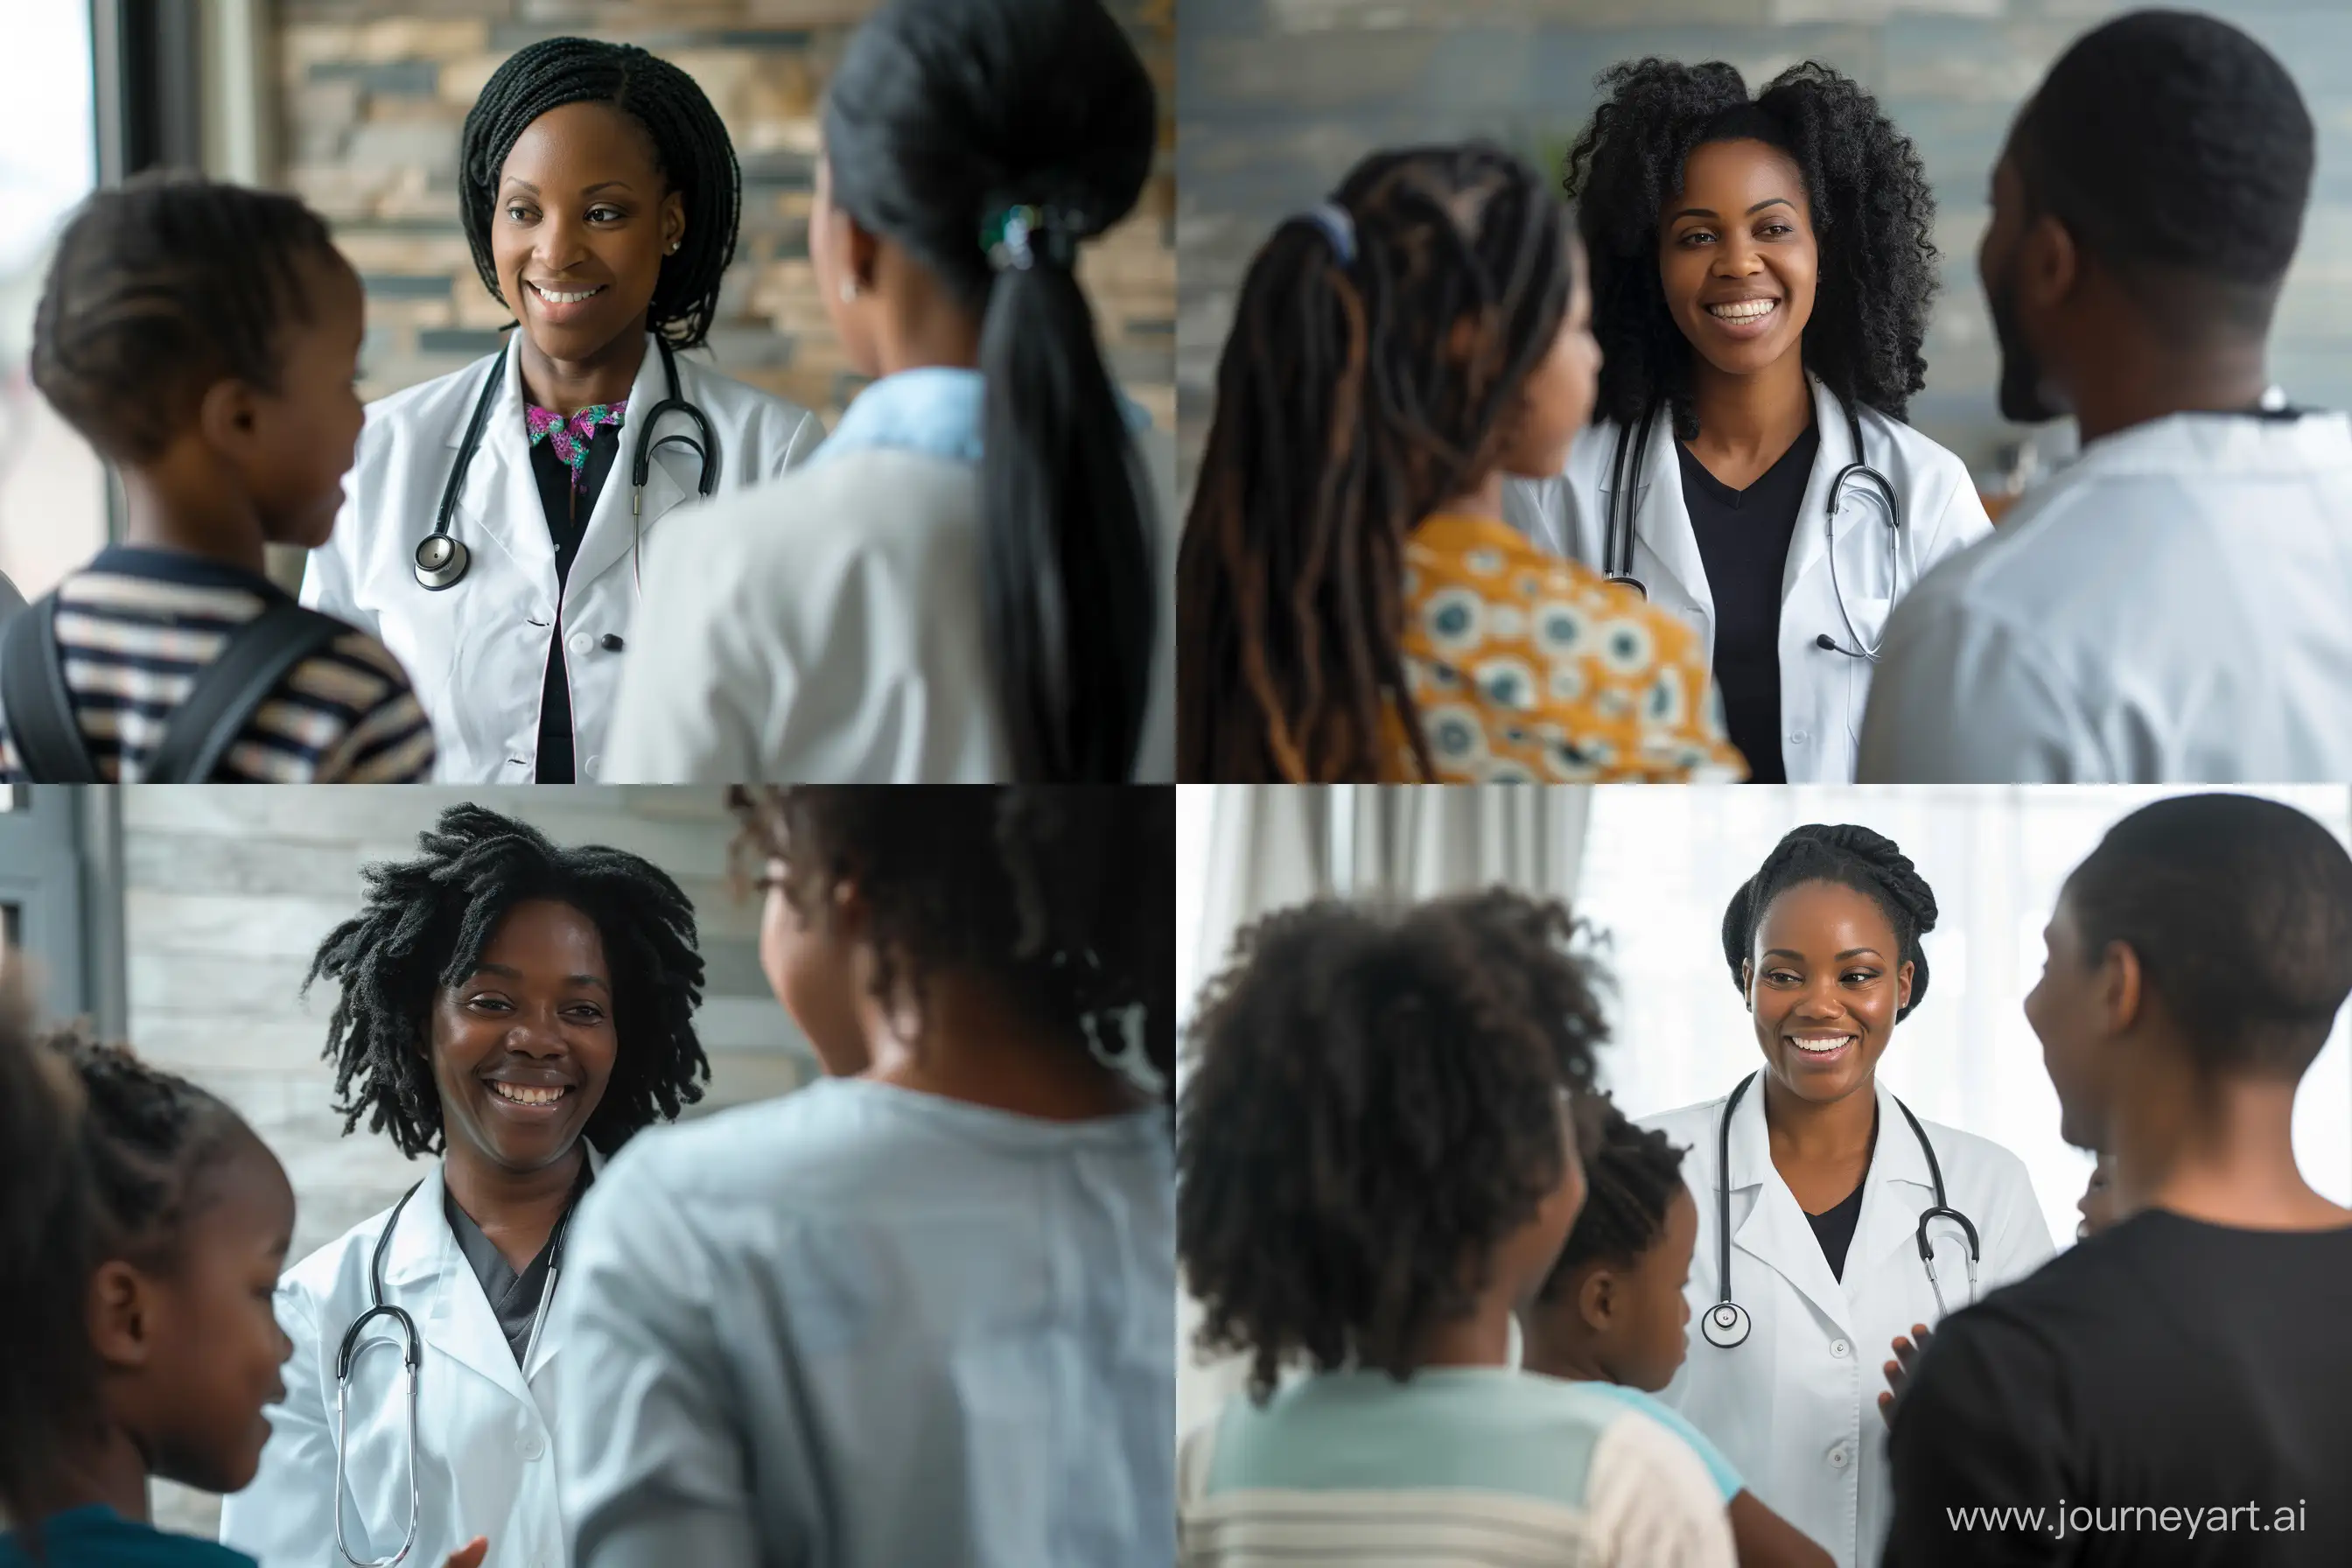 Joyful-Black-Family-Interaction-with-Smiling-Female-Doctor